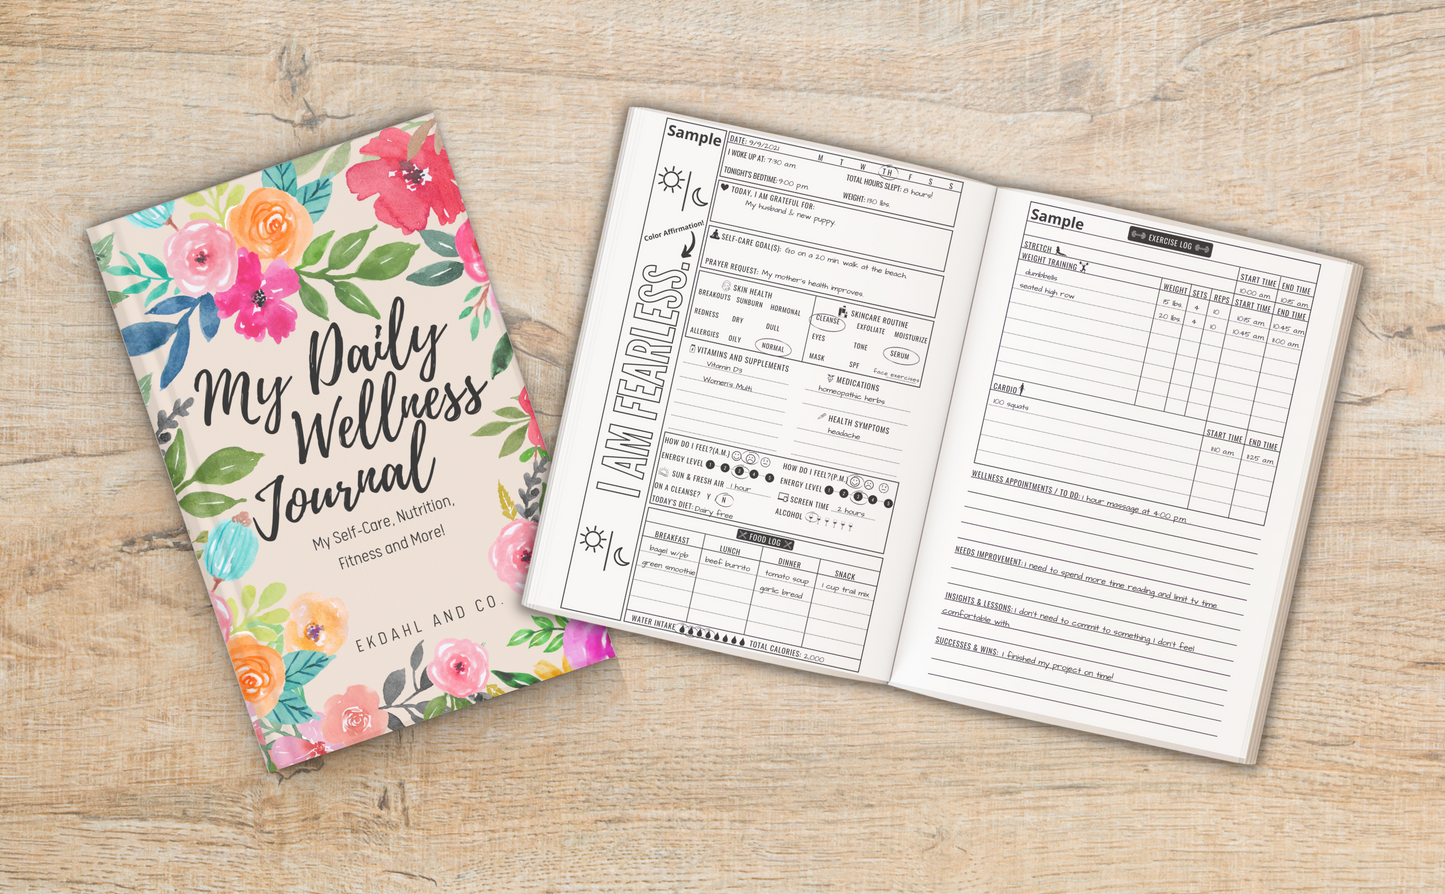 My Daily Wellness Journal: My Self-Care, Nutrition, Fitness, and More! (Paperback) IF SOLD OUT — CLICK LINK BELOW TO BUY IT ON AMAZON↓